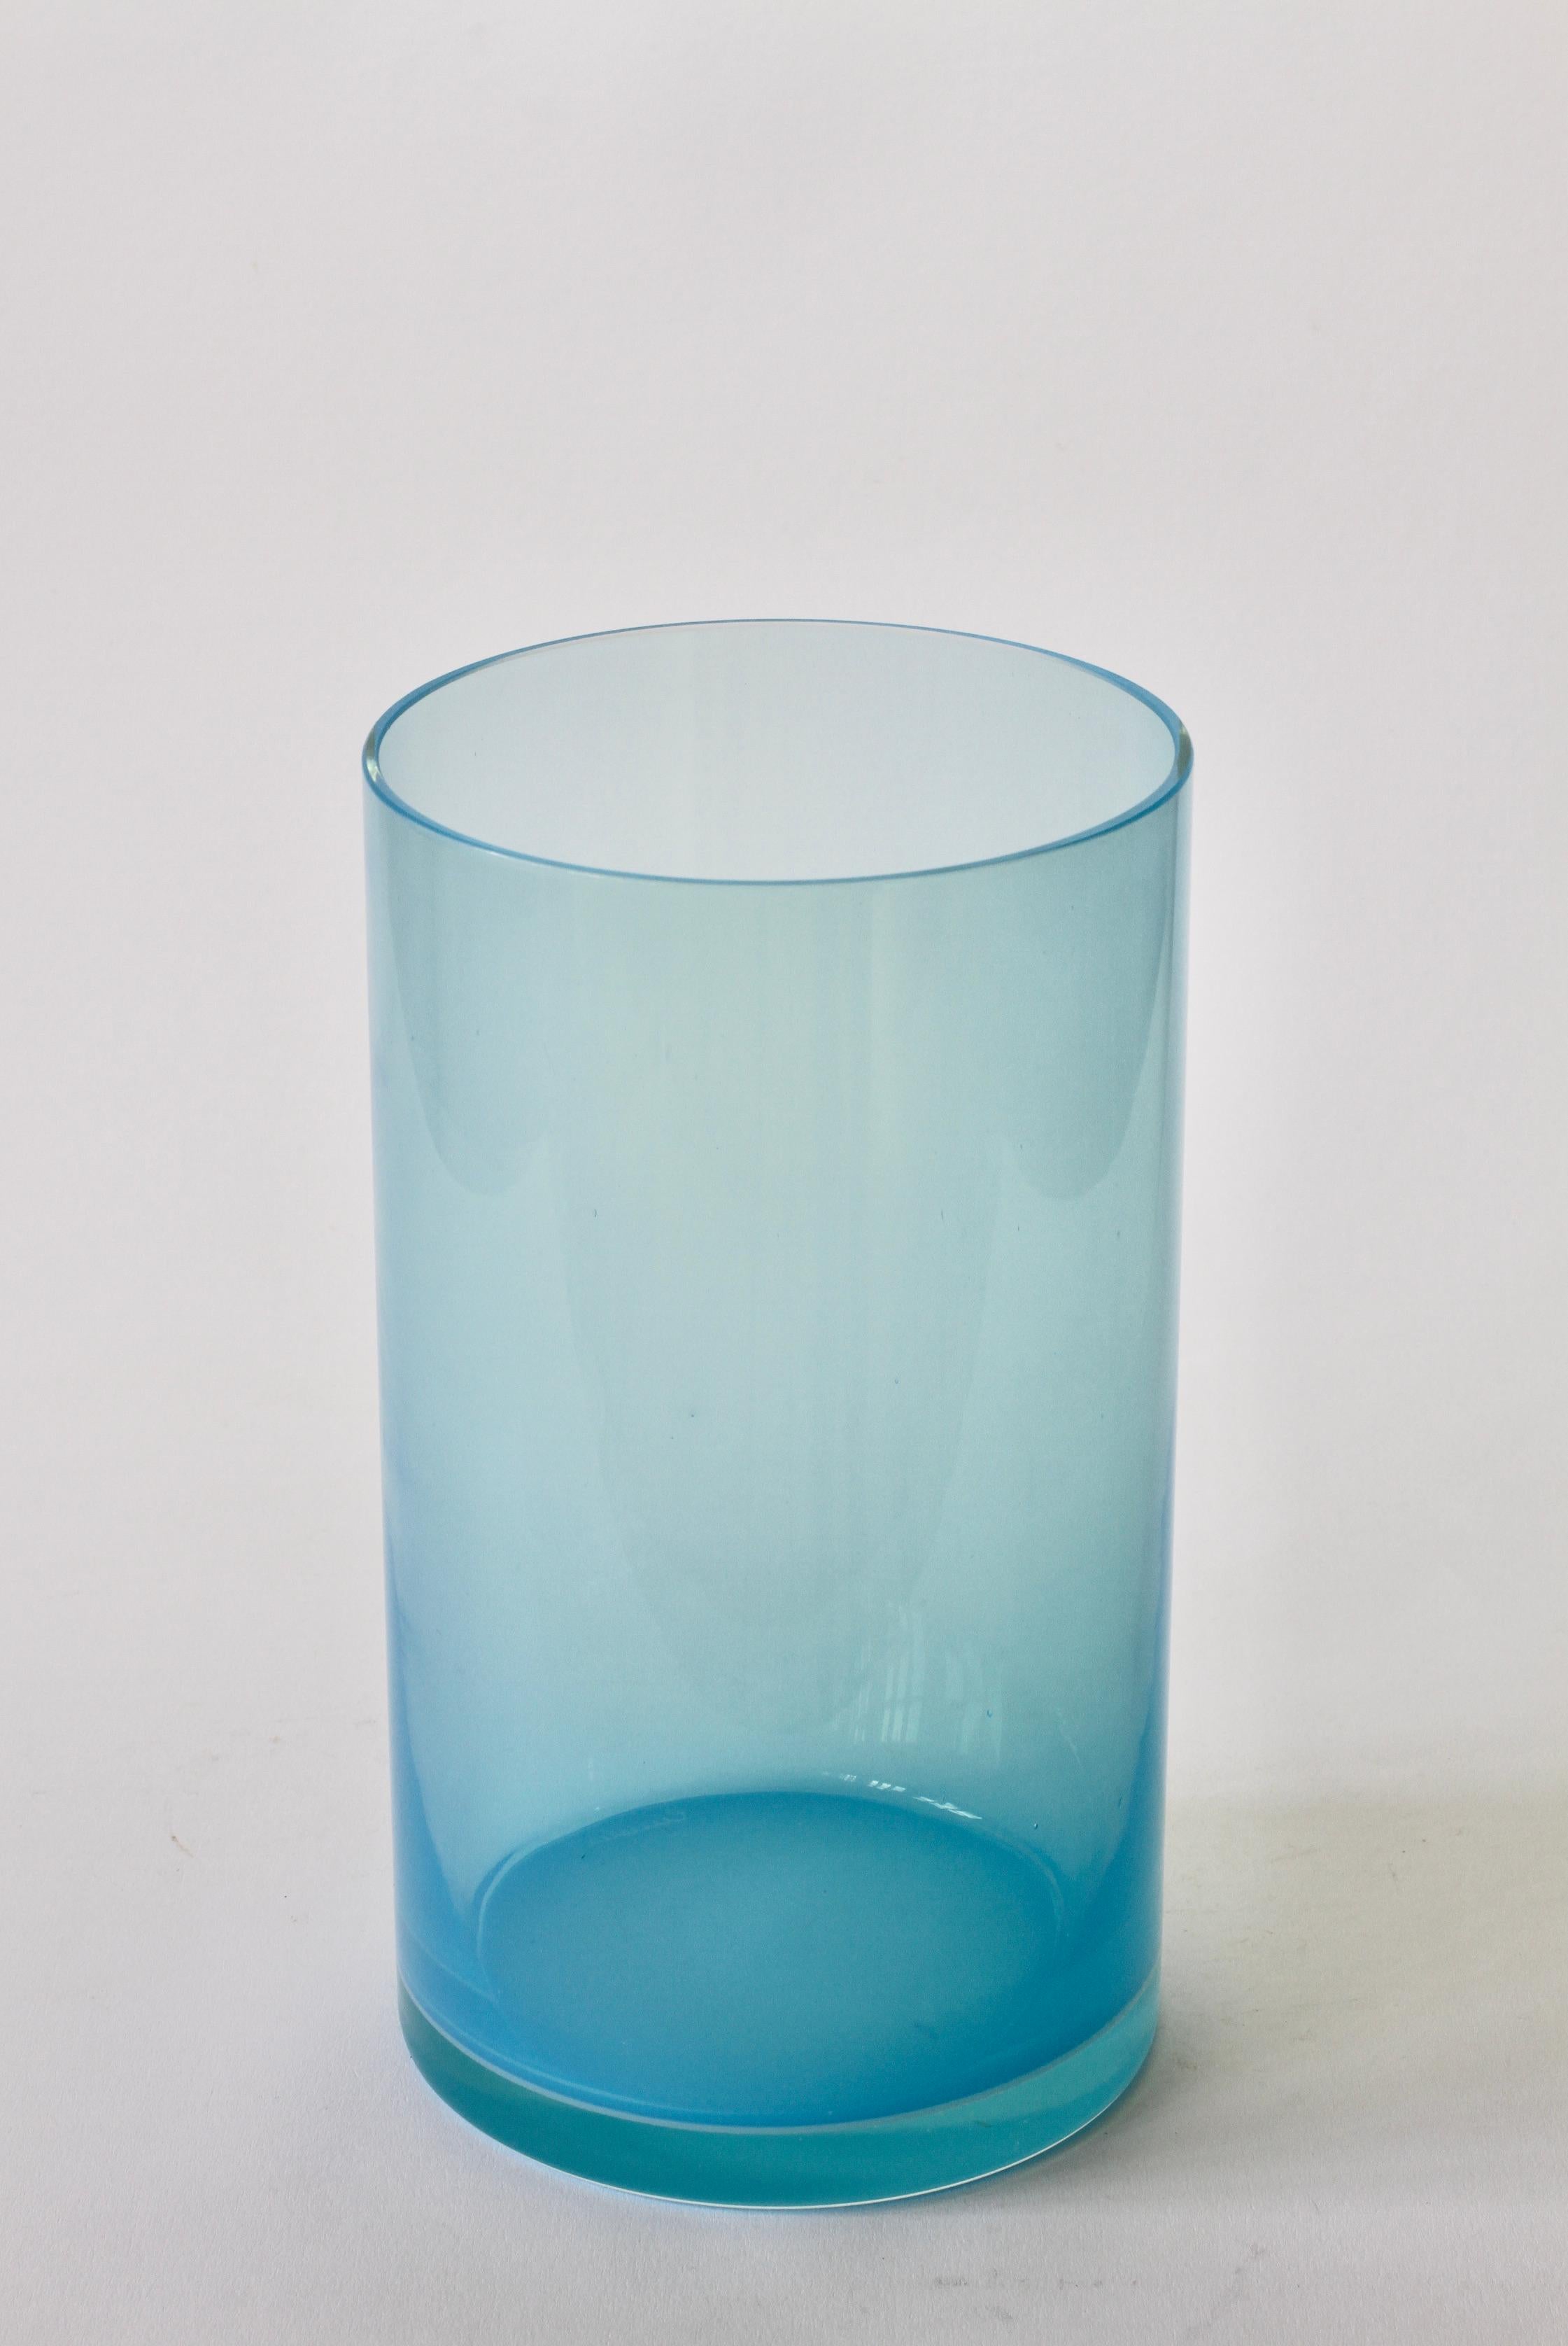 Stunning midcentury, vintage 'Opalino' Murano glass vase or vessel designed by Antonio da Ros for Cenedese, circa 1970-1990 Wonderful translucent color (colour) of vibrant light blue / clear glass. Simplistic yet elegant form - almost